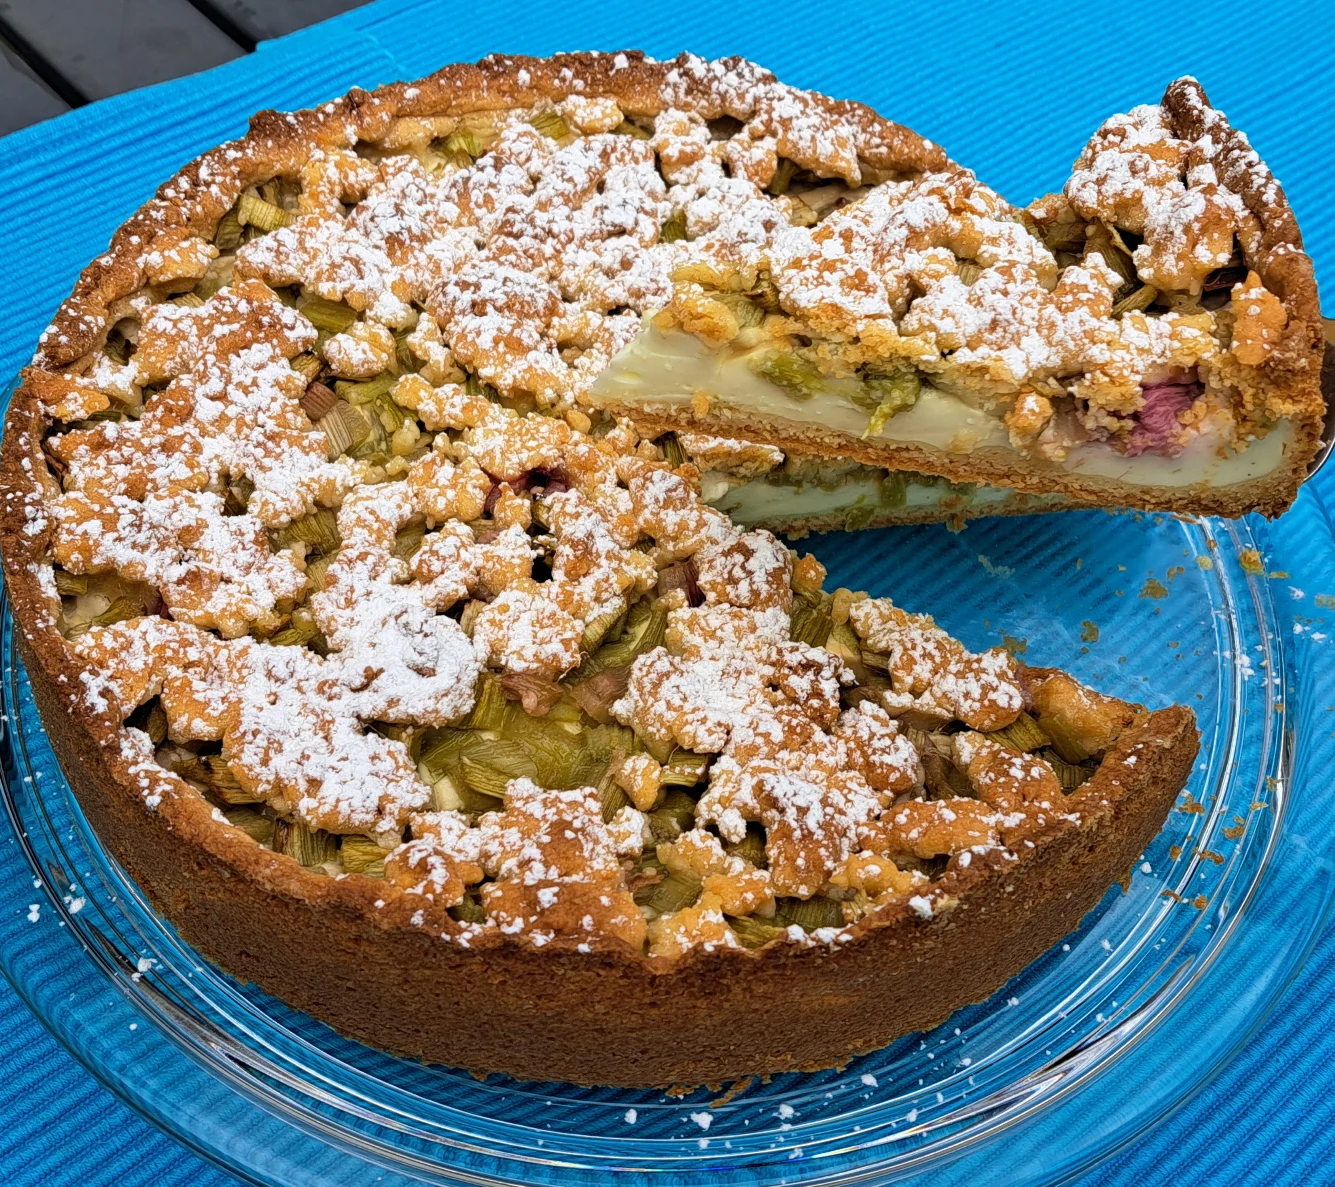 Rhubarb cake with streusel and pudding dusted with powdered sugar.